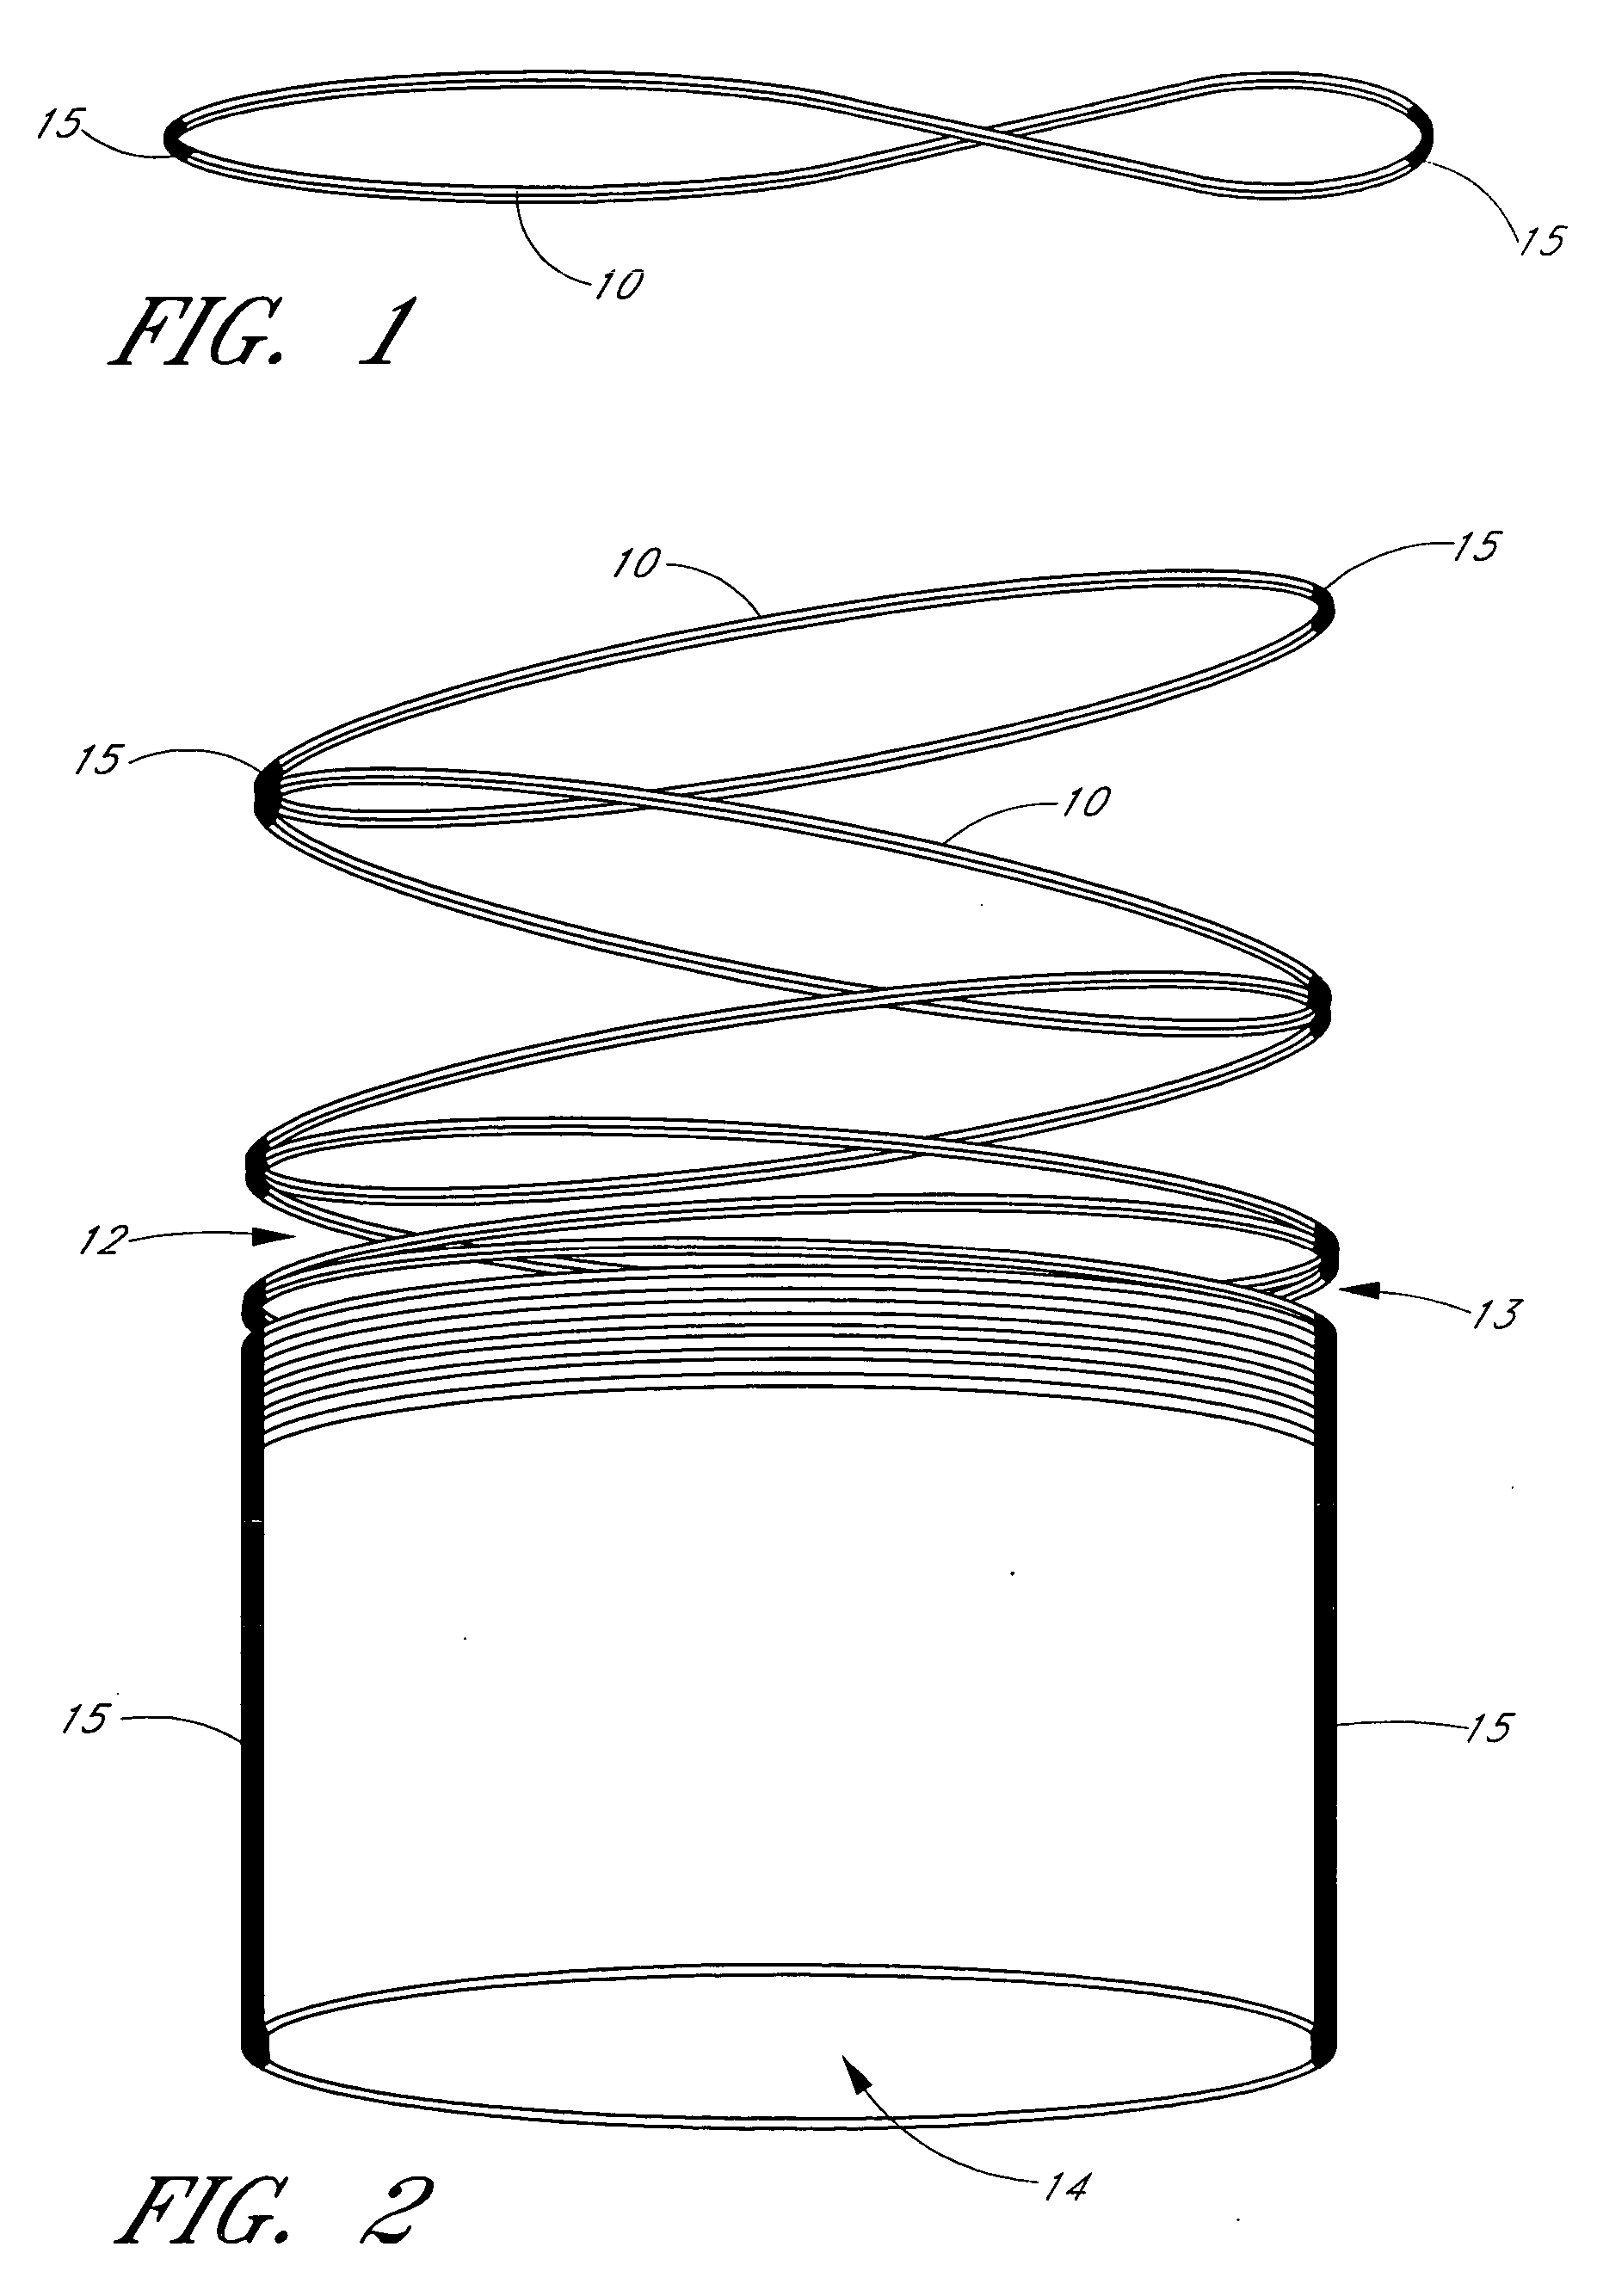 Continuous loop dental floss and methods of making and dispensing same